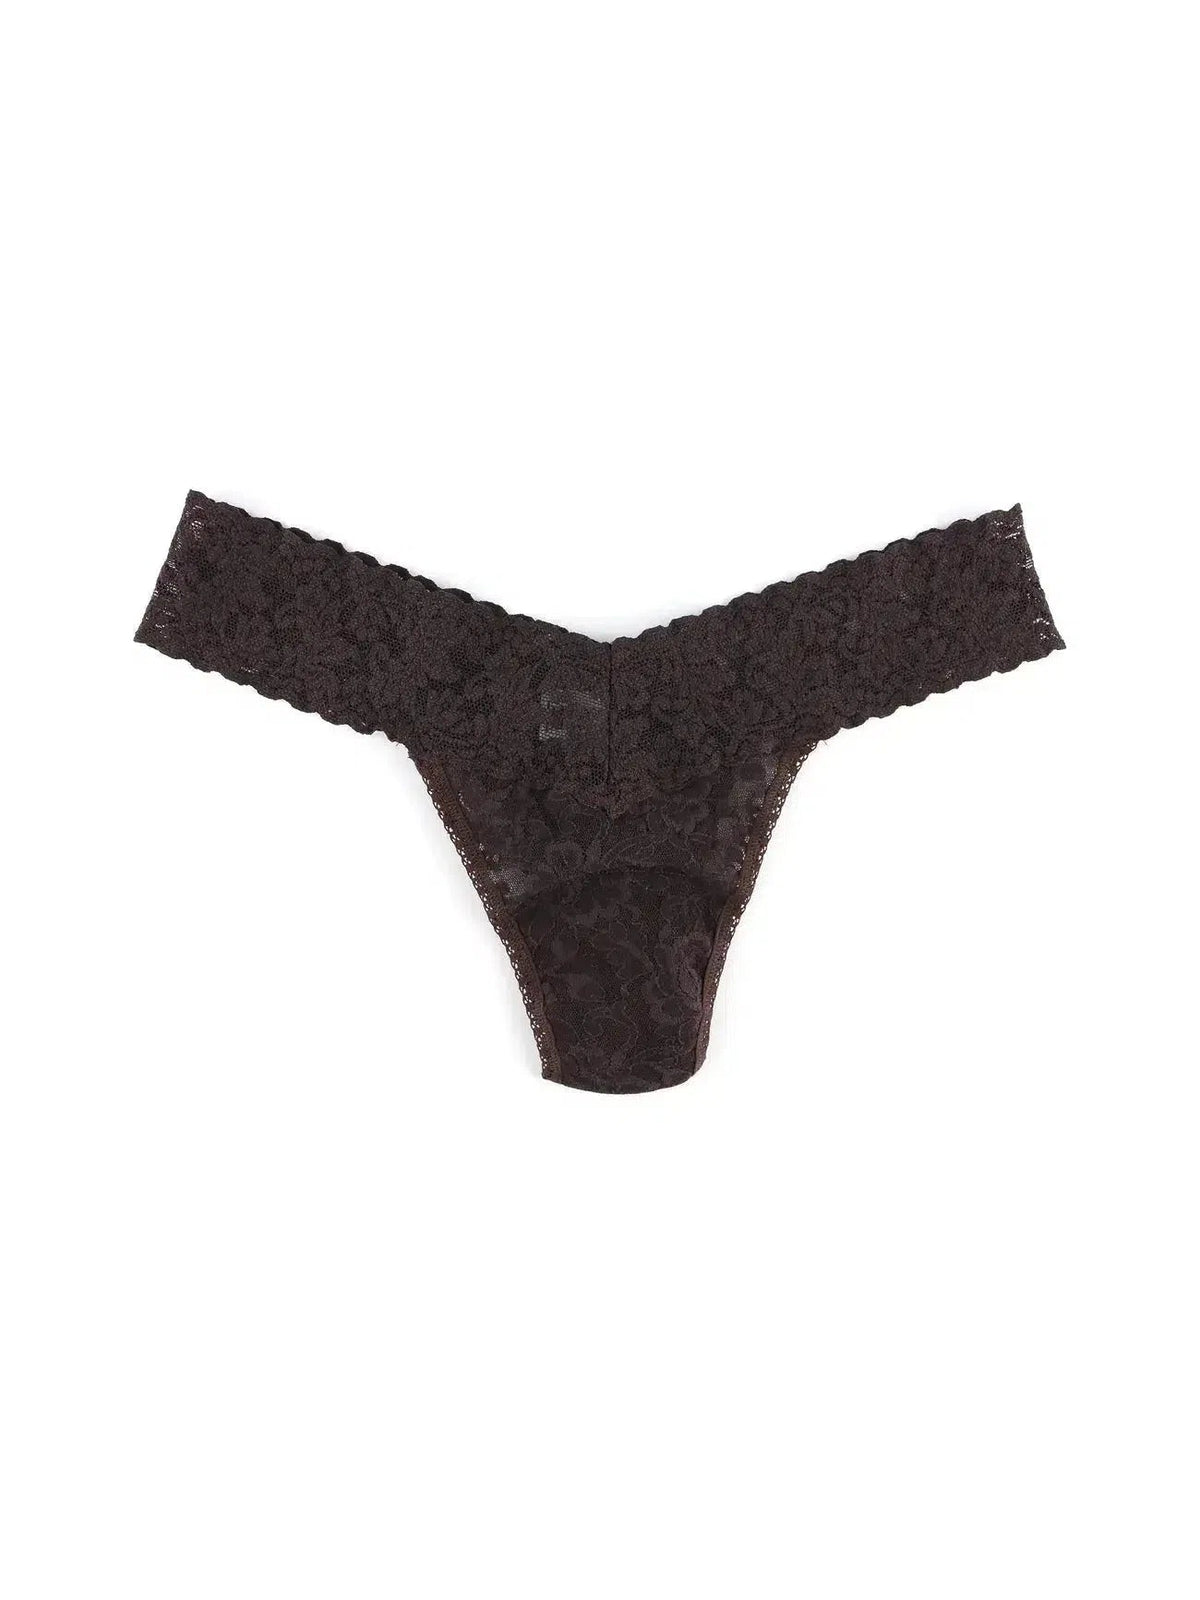 Copy of Hanky Panky Chocolate Low Rise Thong